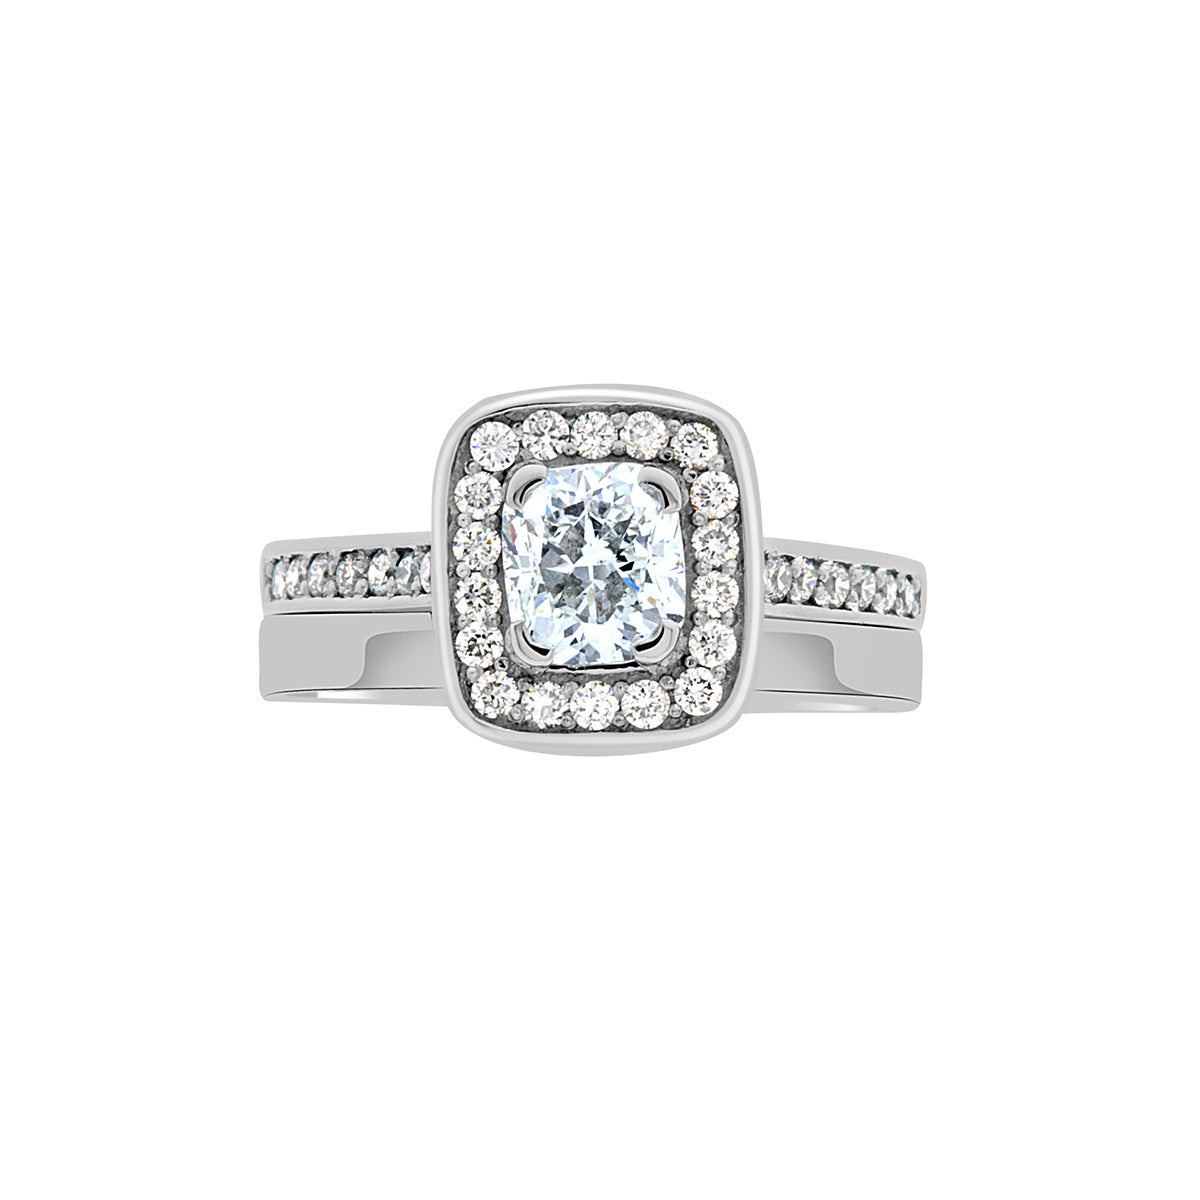 Cushion Cut Diamond Ring in white gold with a matching white gold wedding ring